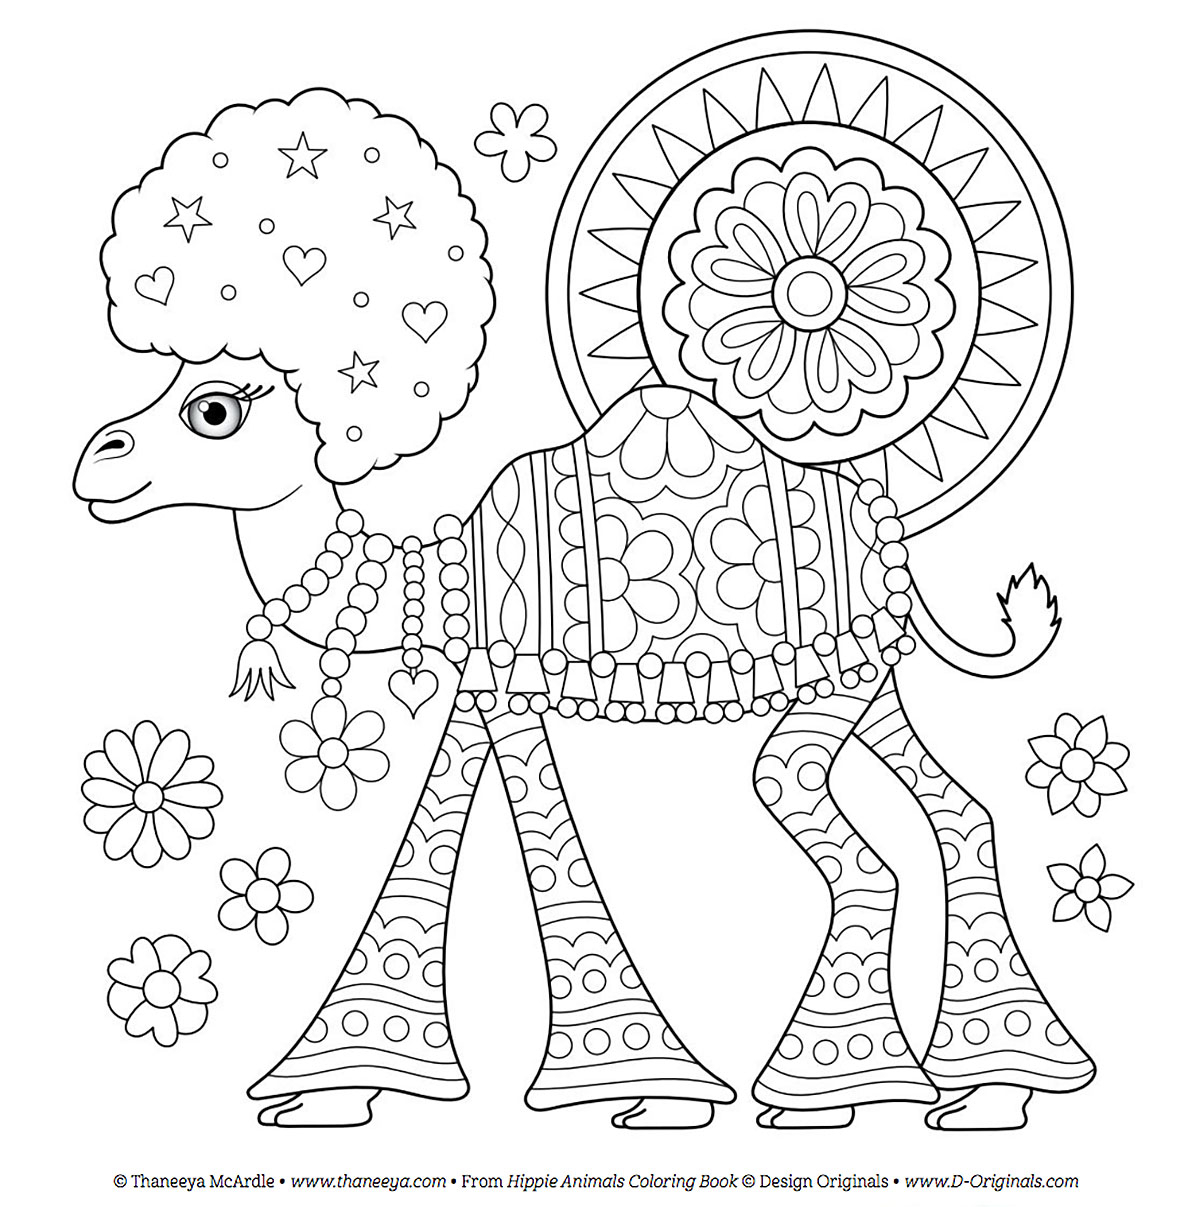 Convert Pictures To Coloring Pages Coloring Pages And Books Coloring Page